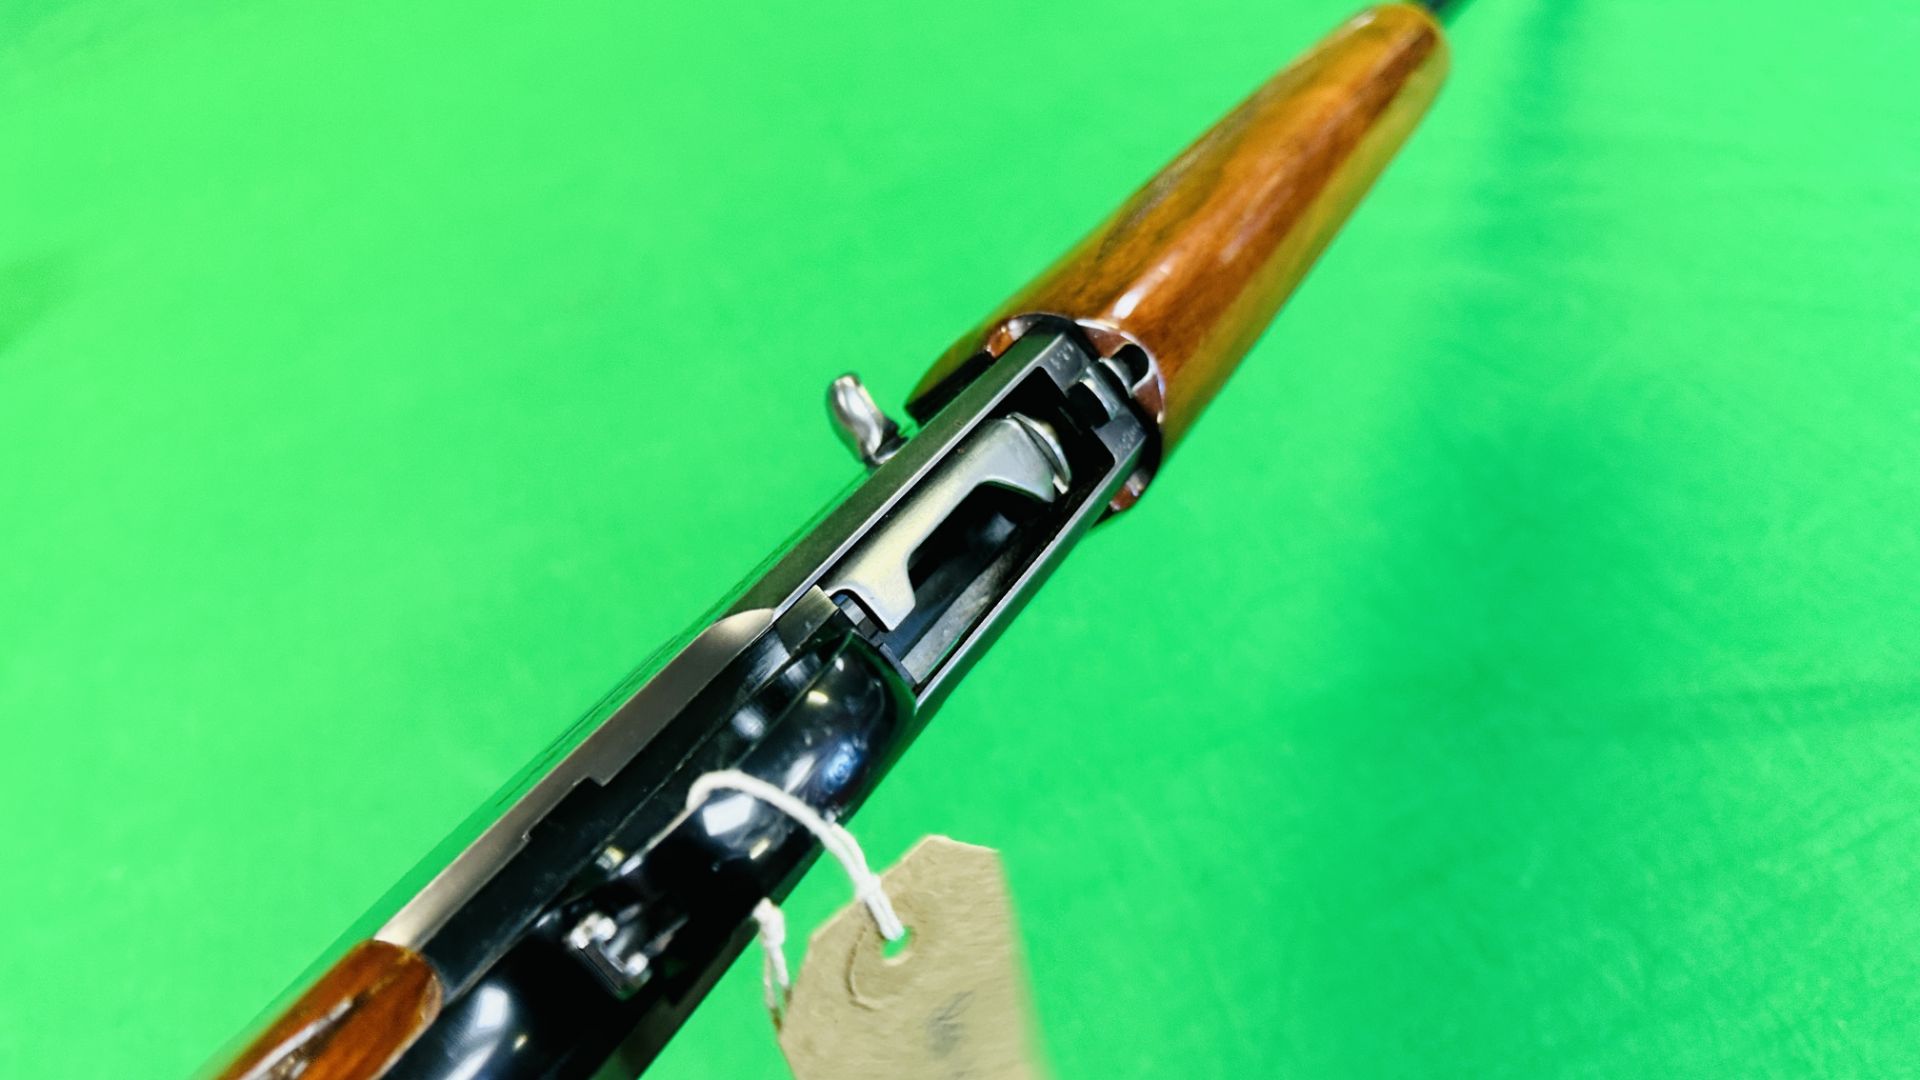 FABRIQUE 12 BORE SELF LOADING TWO SHOT SHOTGUN MODEL "DOUBLE TWO" #C23651 29 INCH BARREL VENTILATED - Image 13 of 15